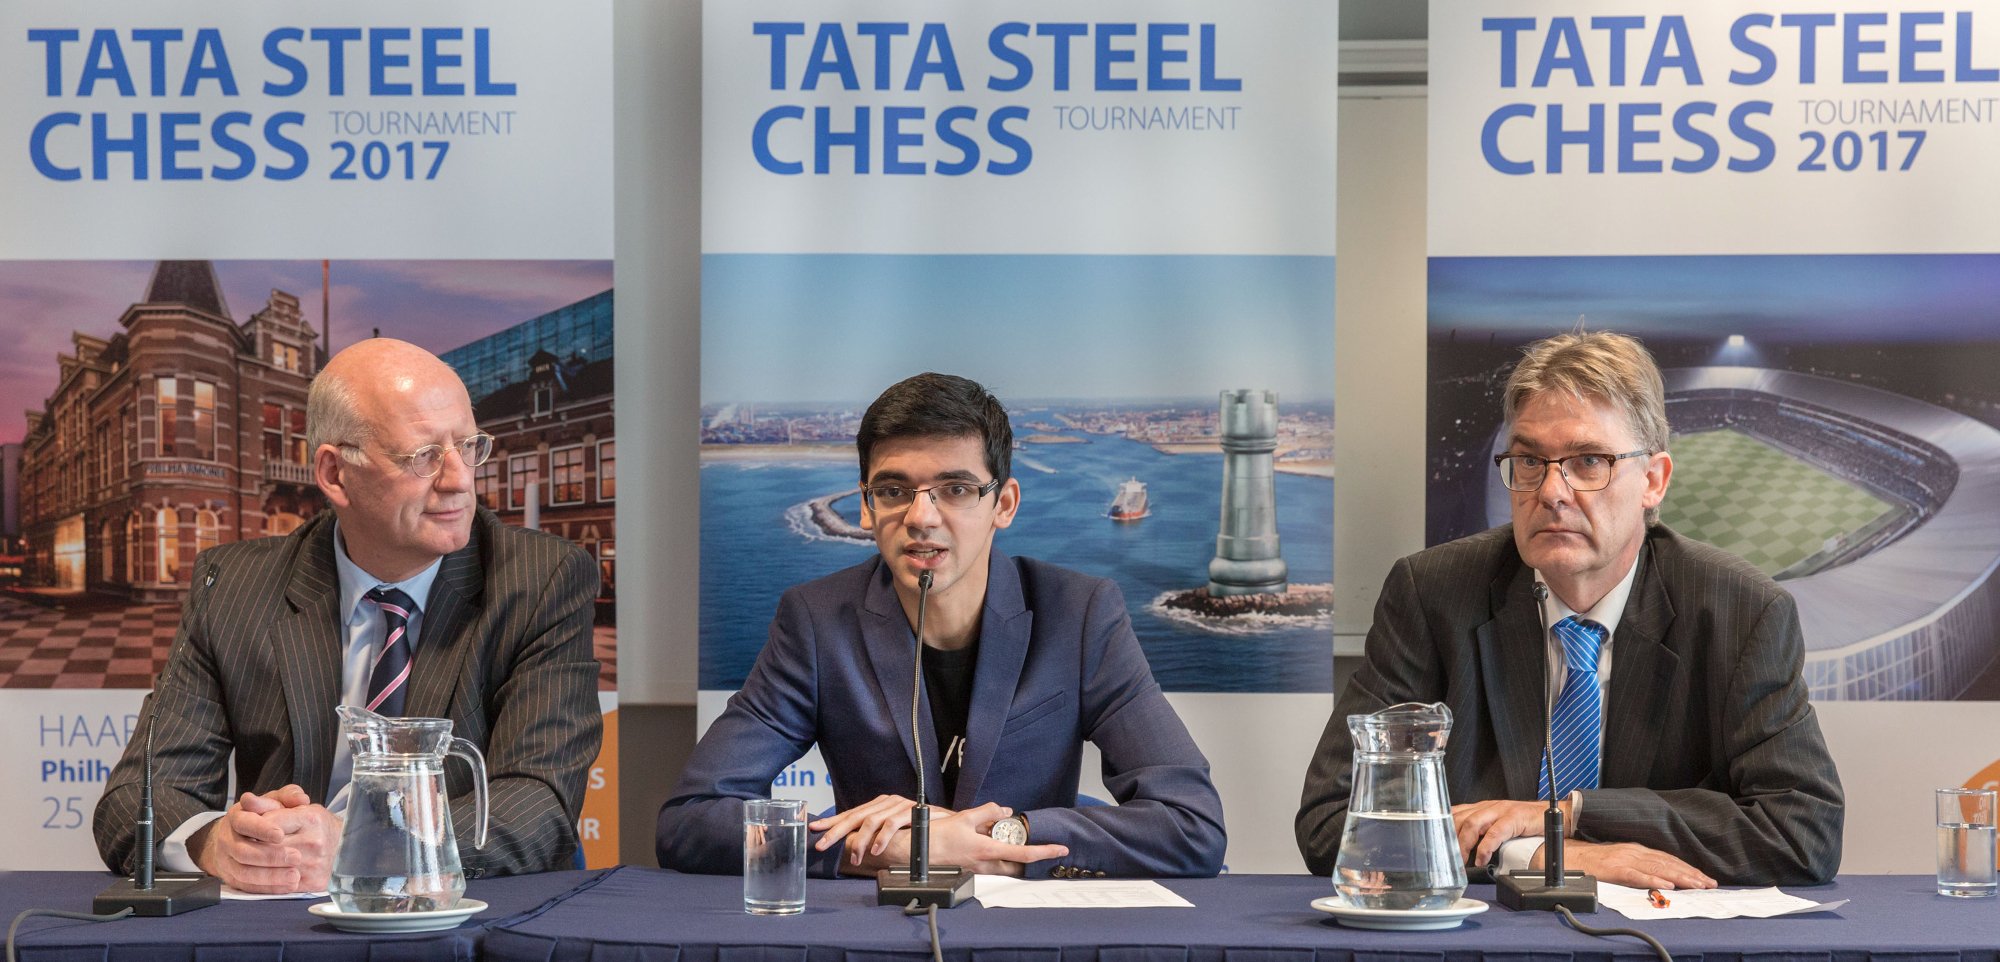 Tata Steel Chess on X: With Tournament Director @Jvdbergchess